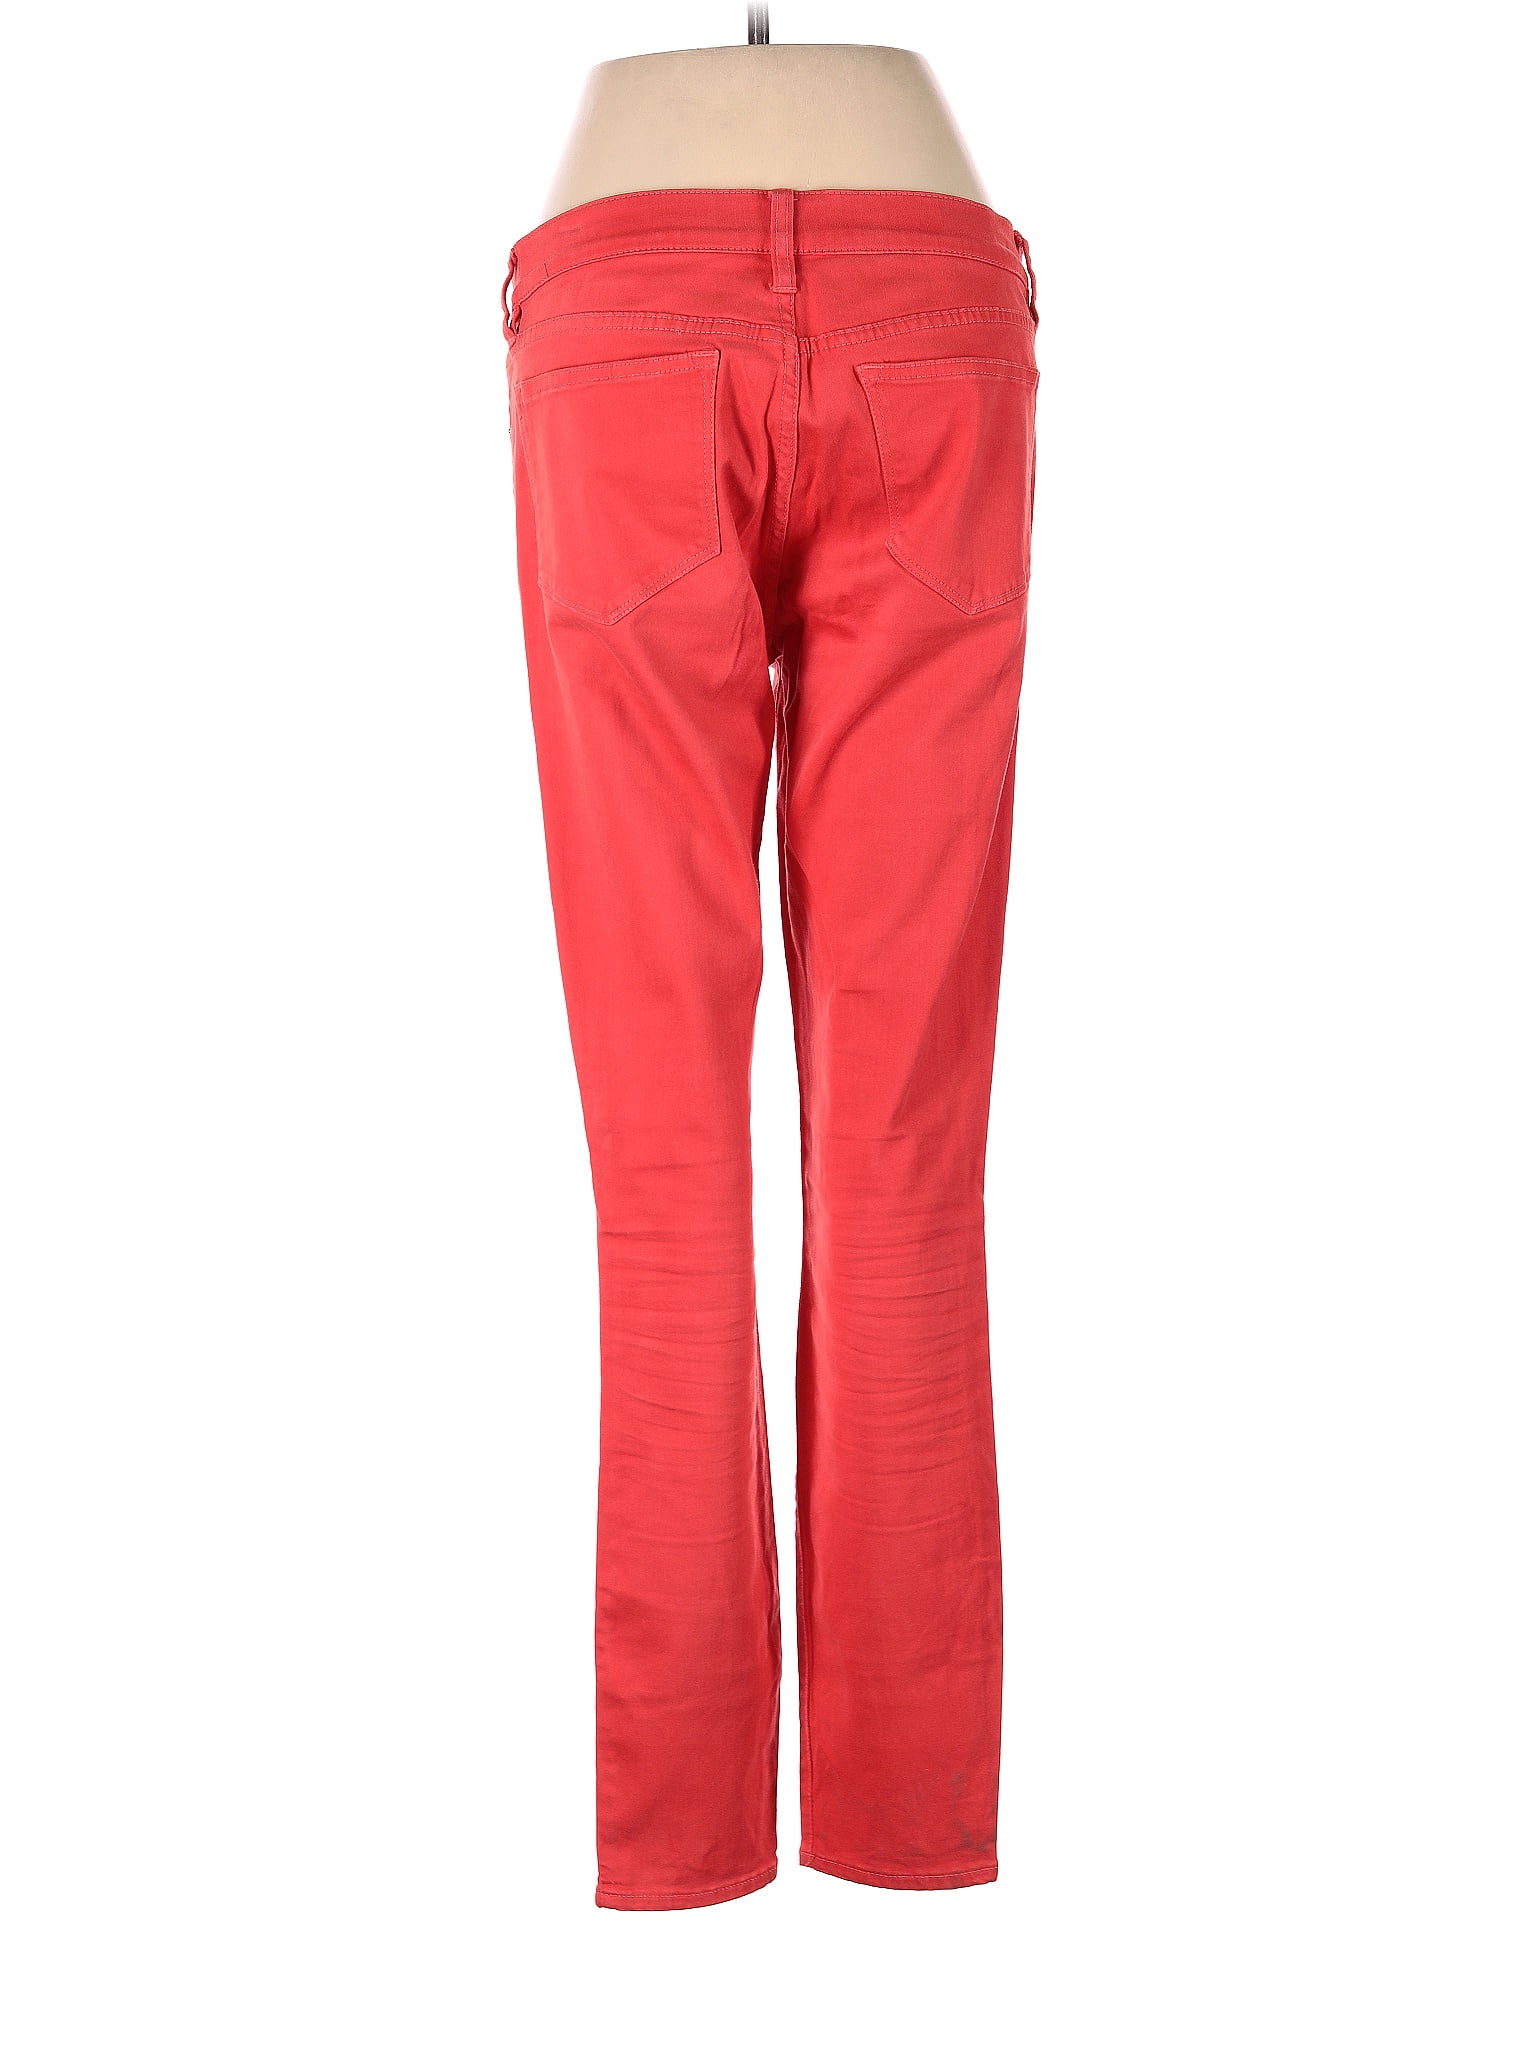 Women's Red Jeans